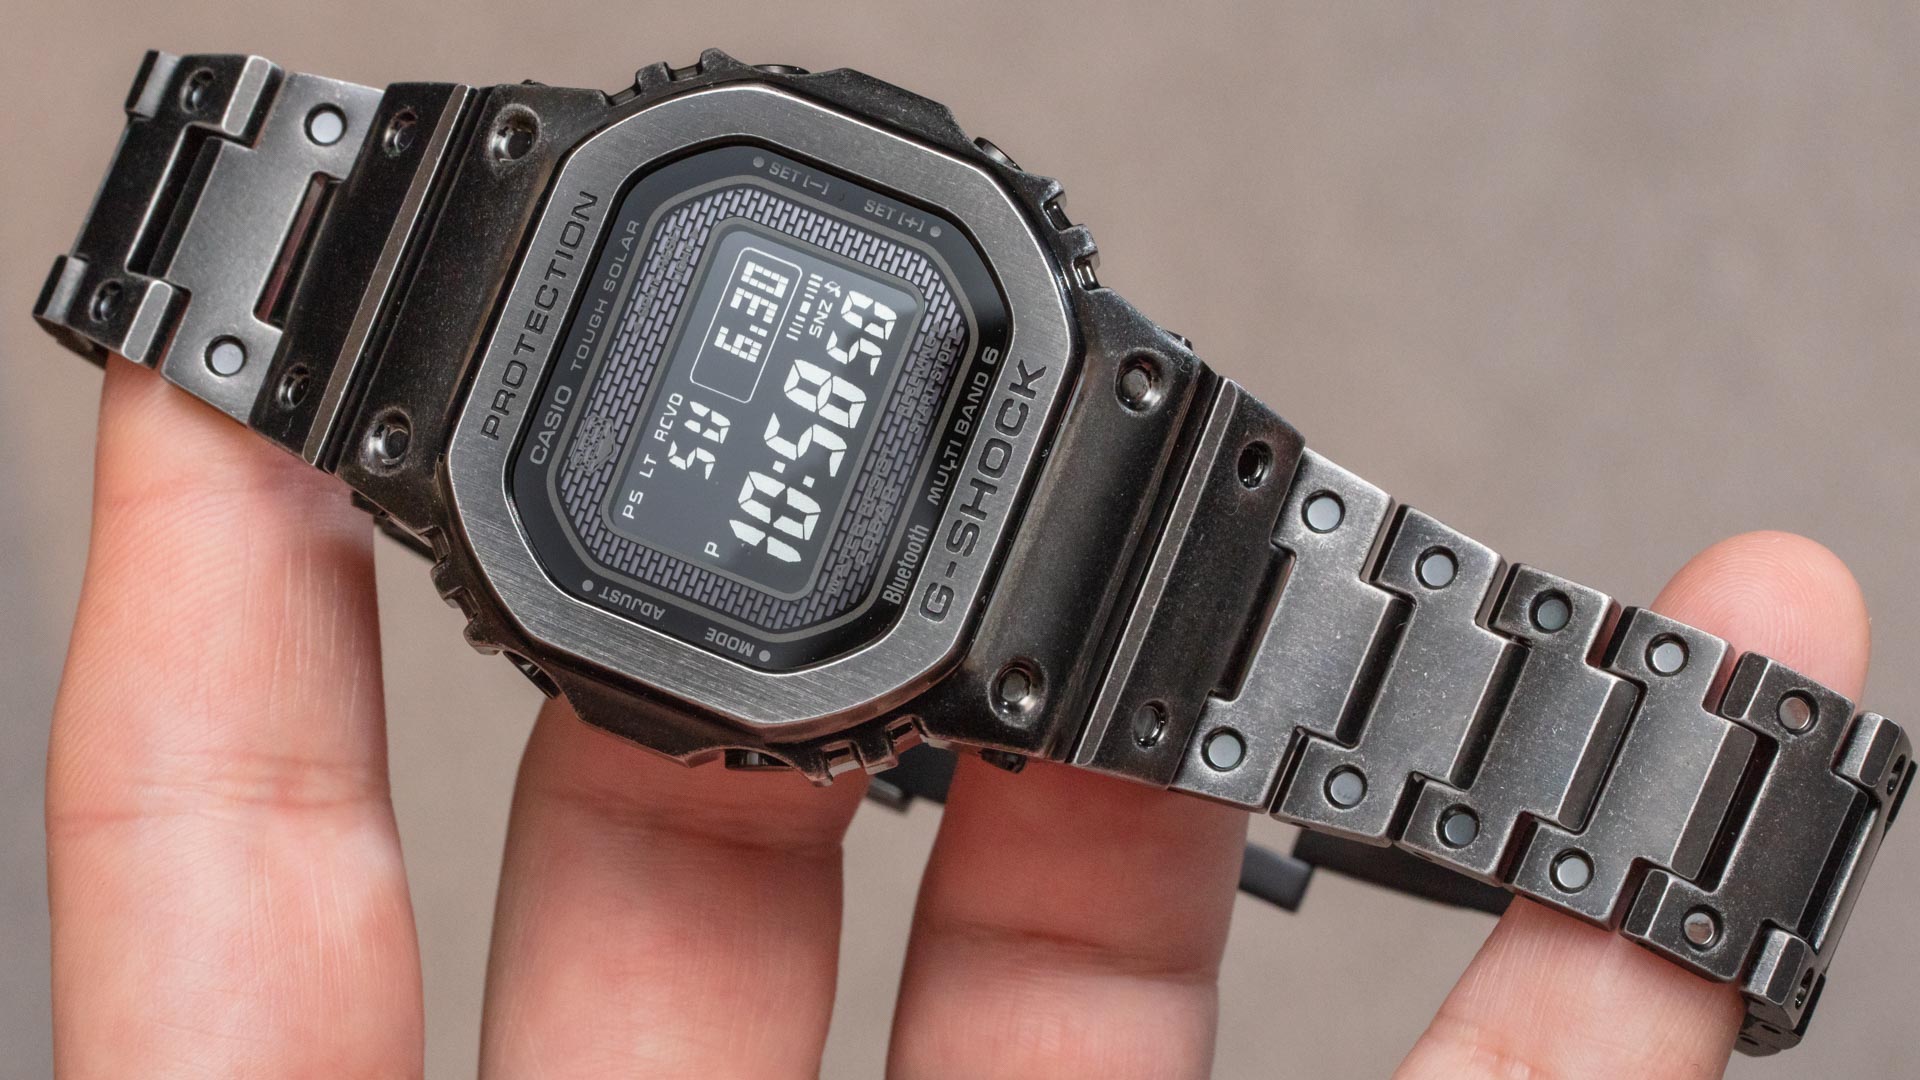 Casio G-Shock GMW-B5000V Aged IP Full-Metal Watch Hands-On Hands-On 